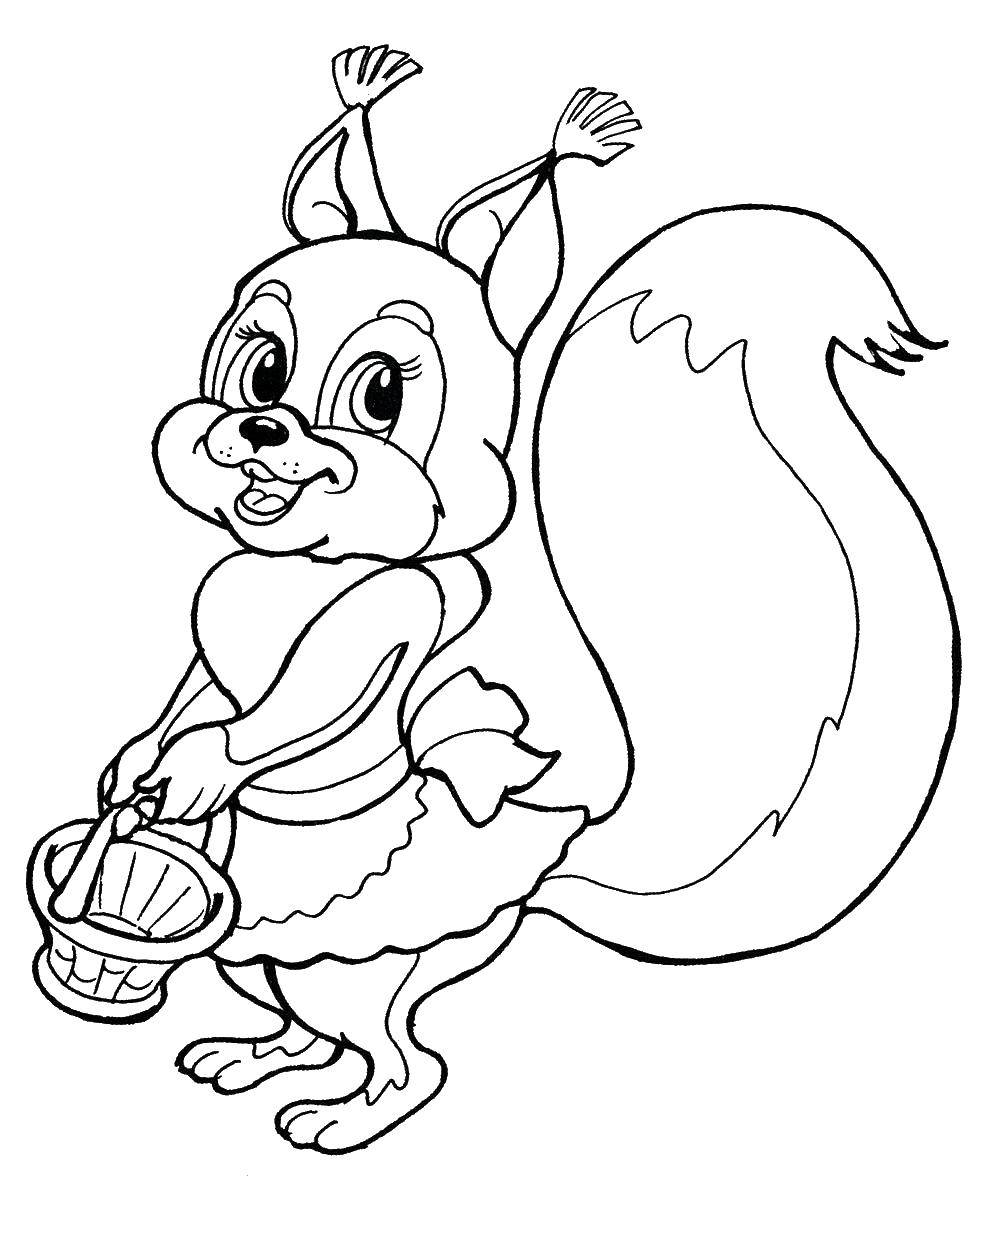 Coloring Squirrel with basket. Category squirrel. Tags:  squirrel.